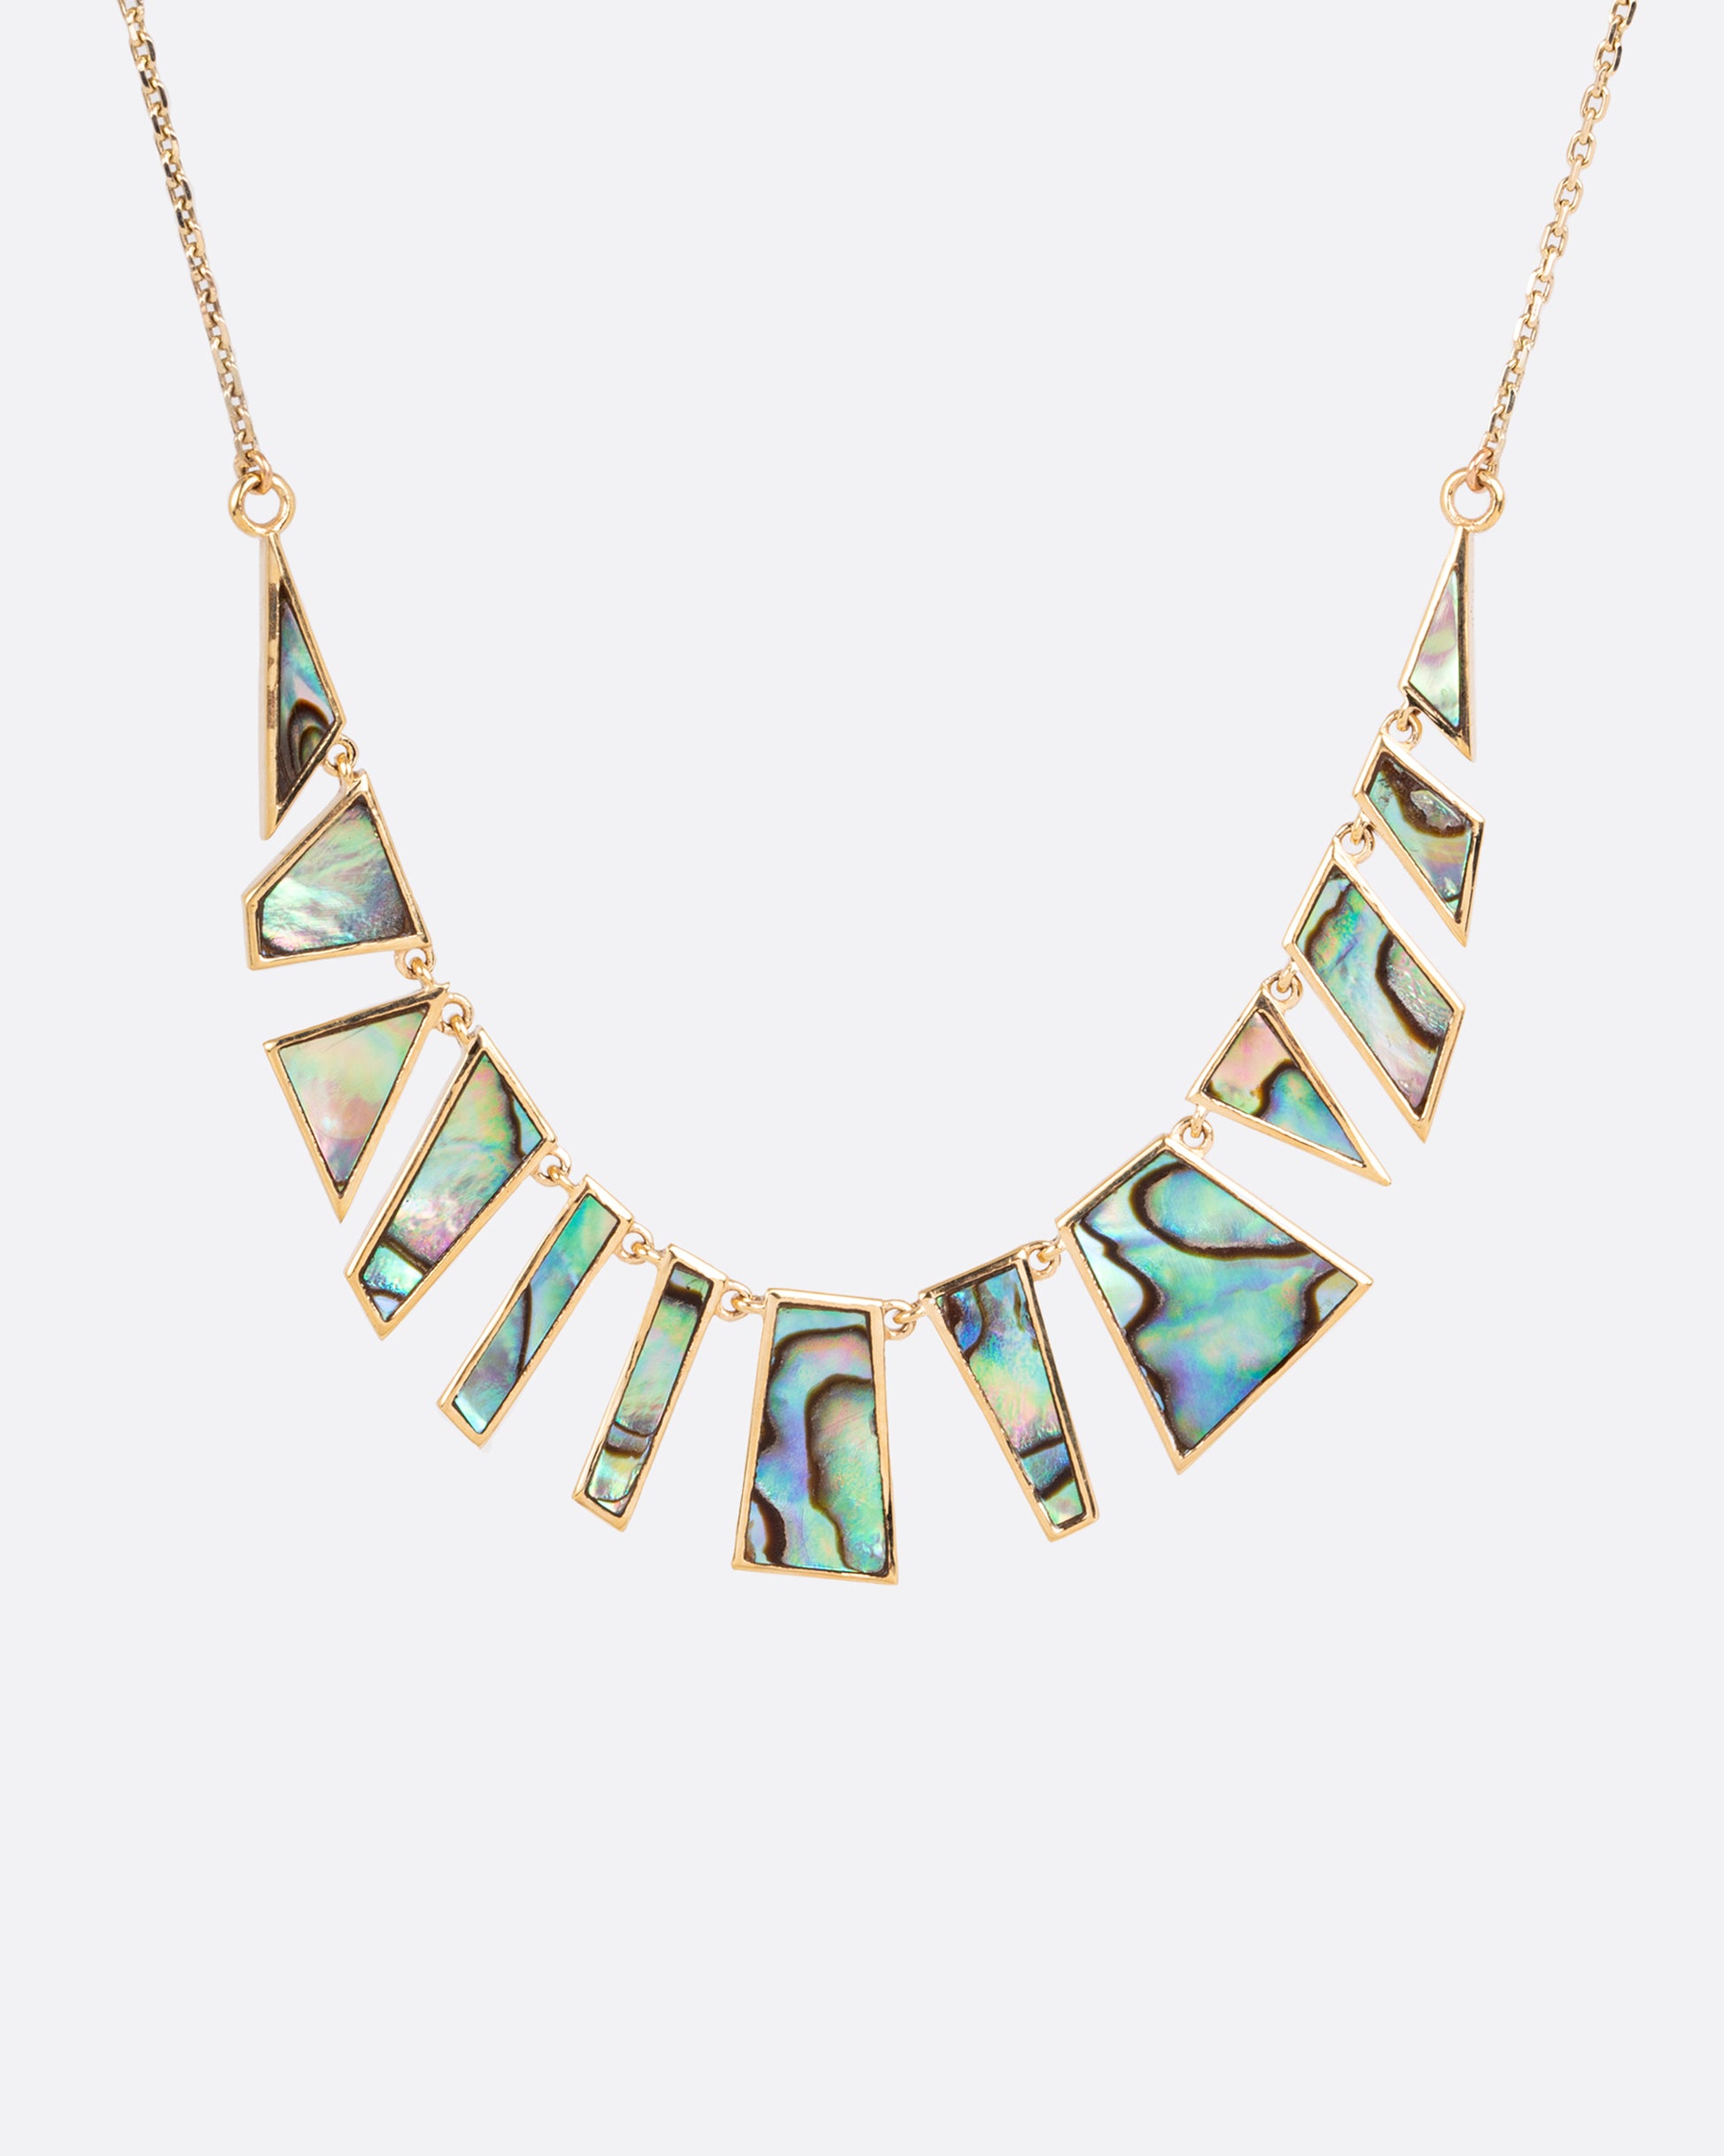 Geometric slices of abalone fit together in this mosaic necklace.